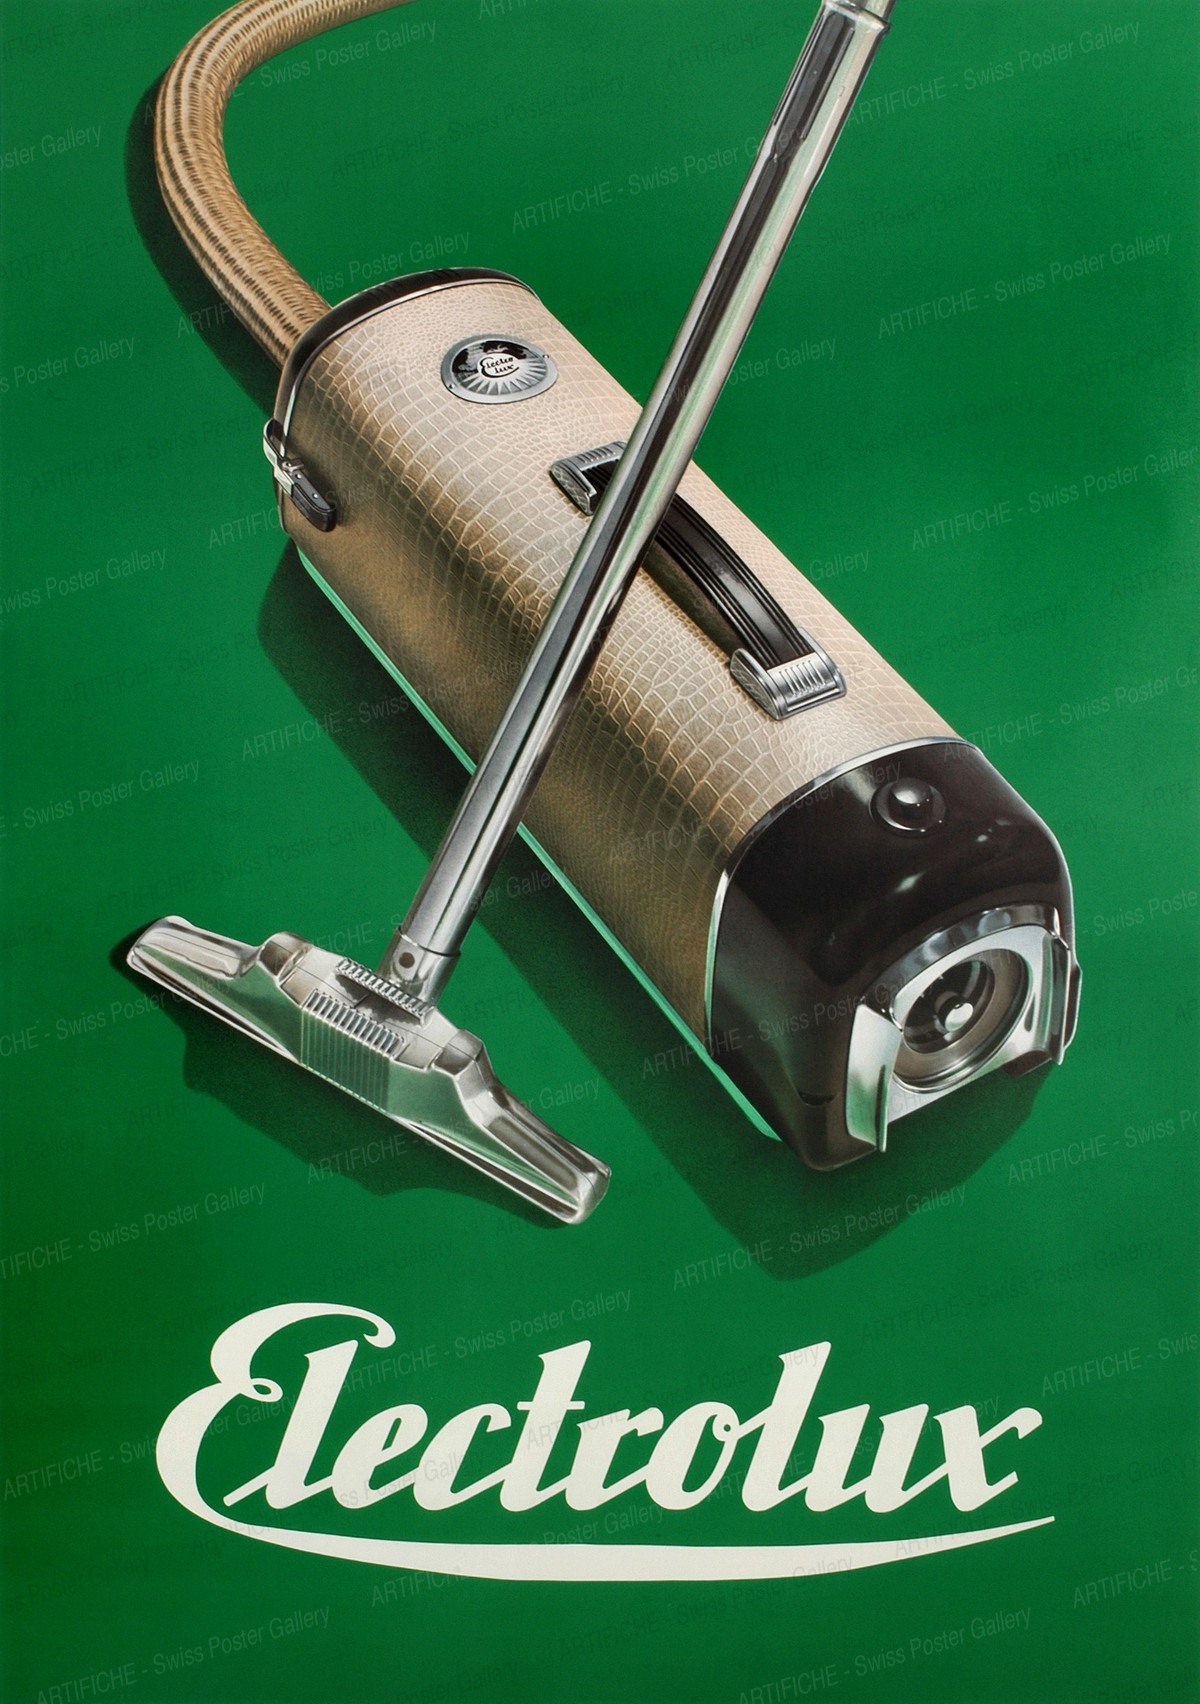 Electrolux – Vacuum cleaner, Artist unknown